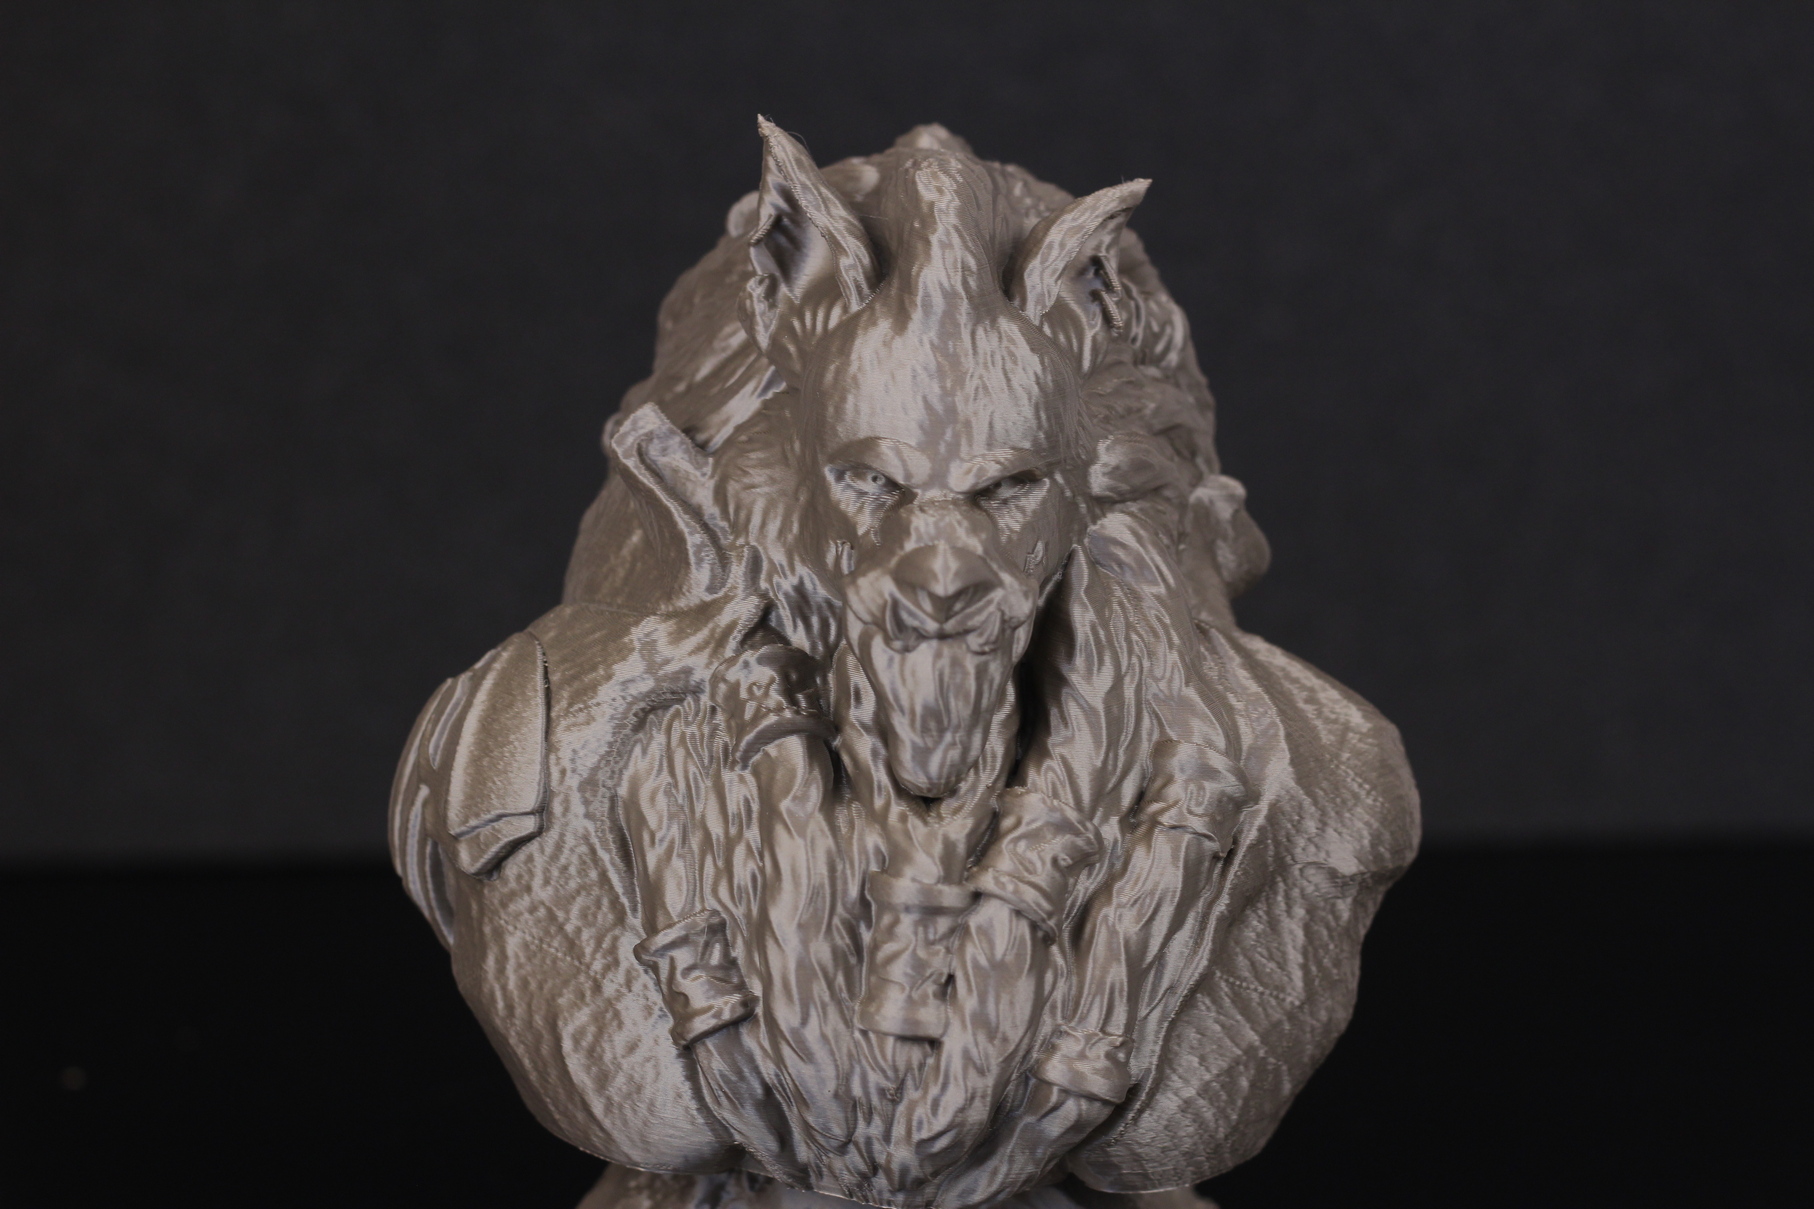 Worgen Bust printed on RatRig V Core 3 2 | RatRig V-Core 3 Review: Premium CoreXY 3D Printer Kit